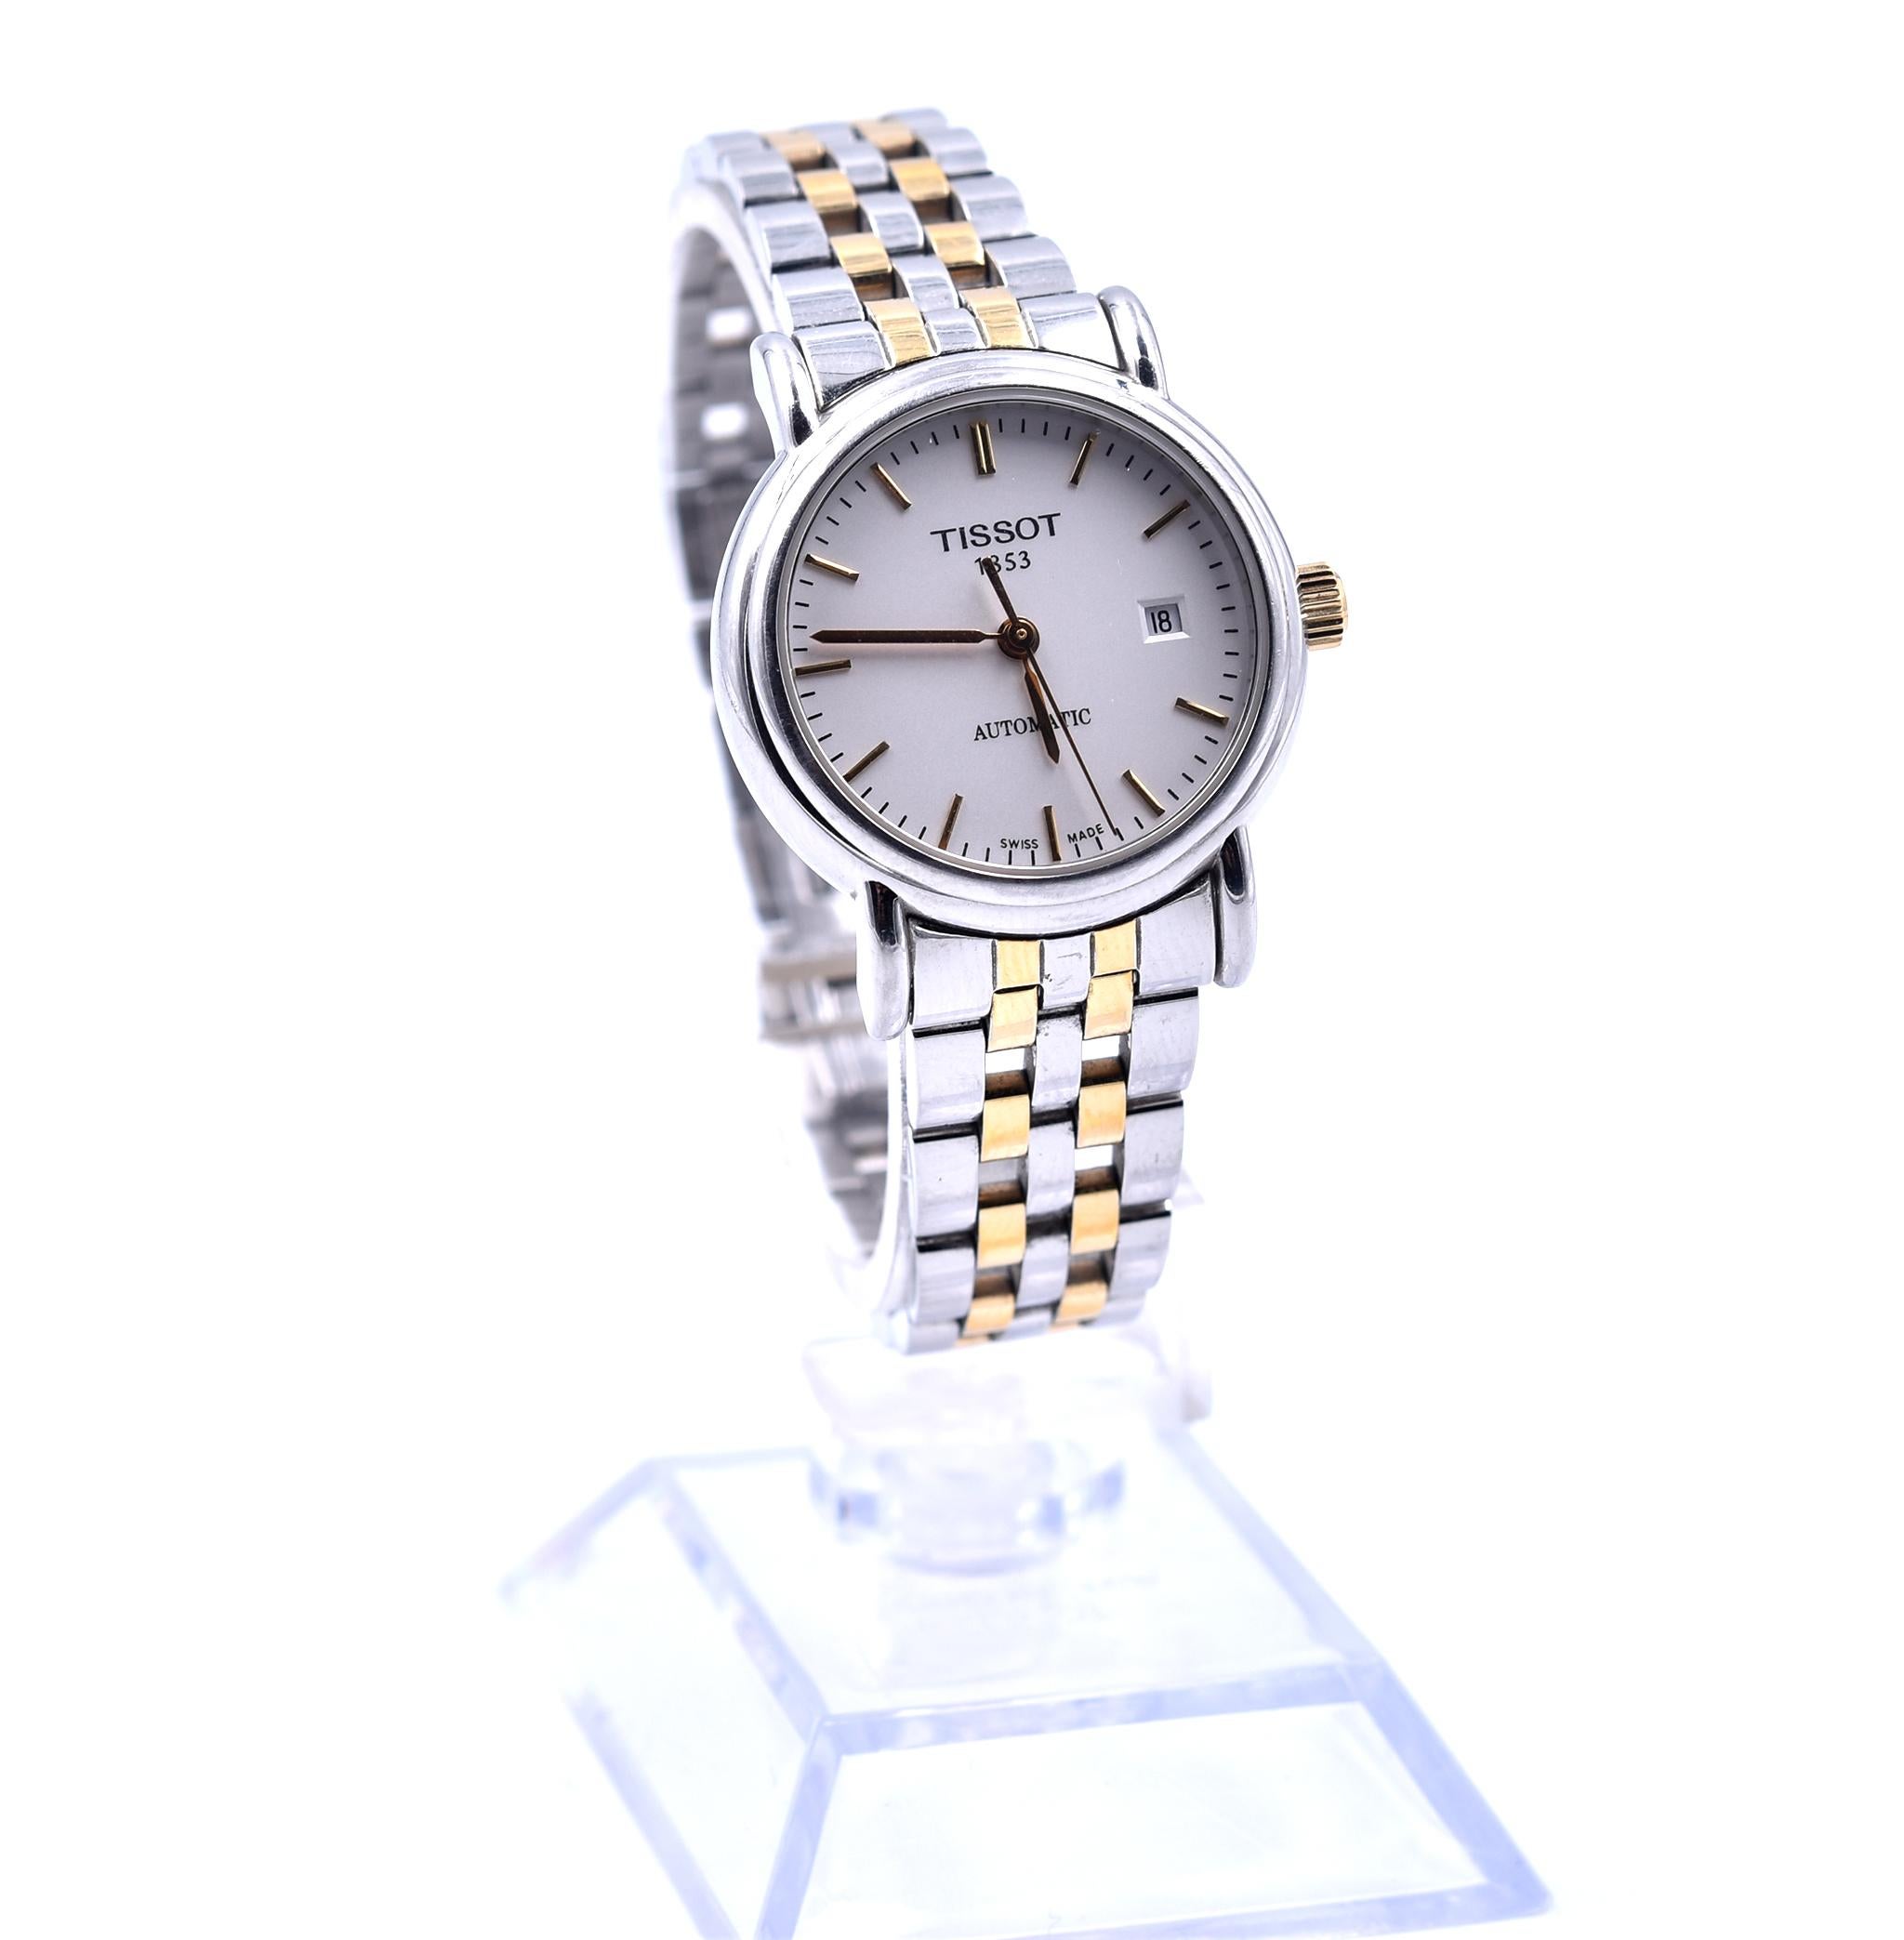 Movement: automatic
Function: hours, minutes, seconds
Case: 27mm stainless steel case, diamond bezel, sapphire protective crystal, push/pull crown
Band: stainless steel and gold plated bracelet with double fold over clasp, will fit 6 ½-inch